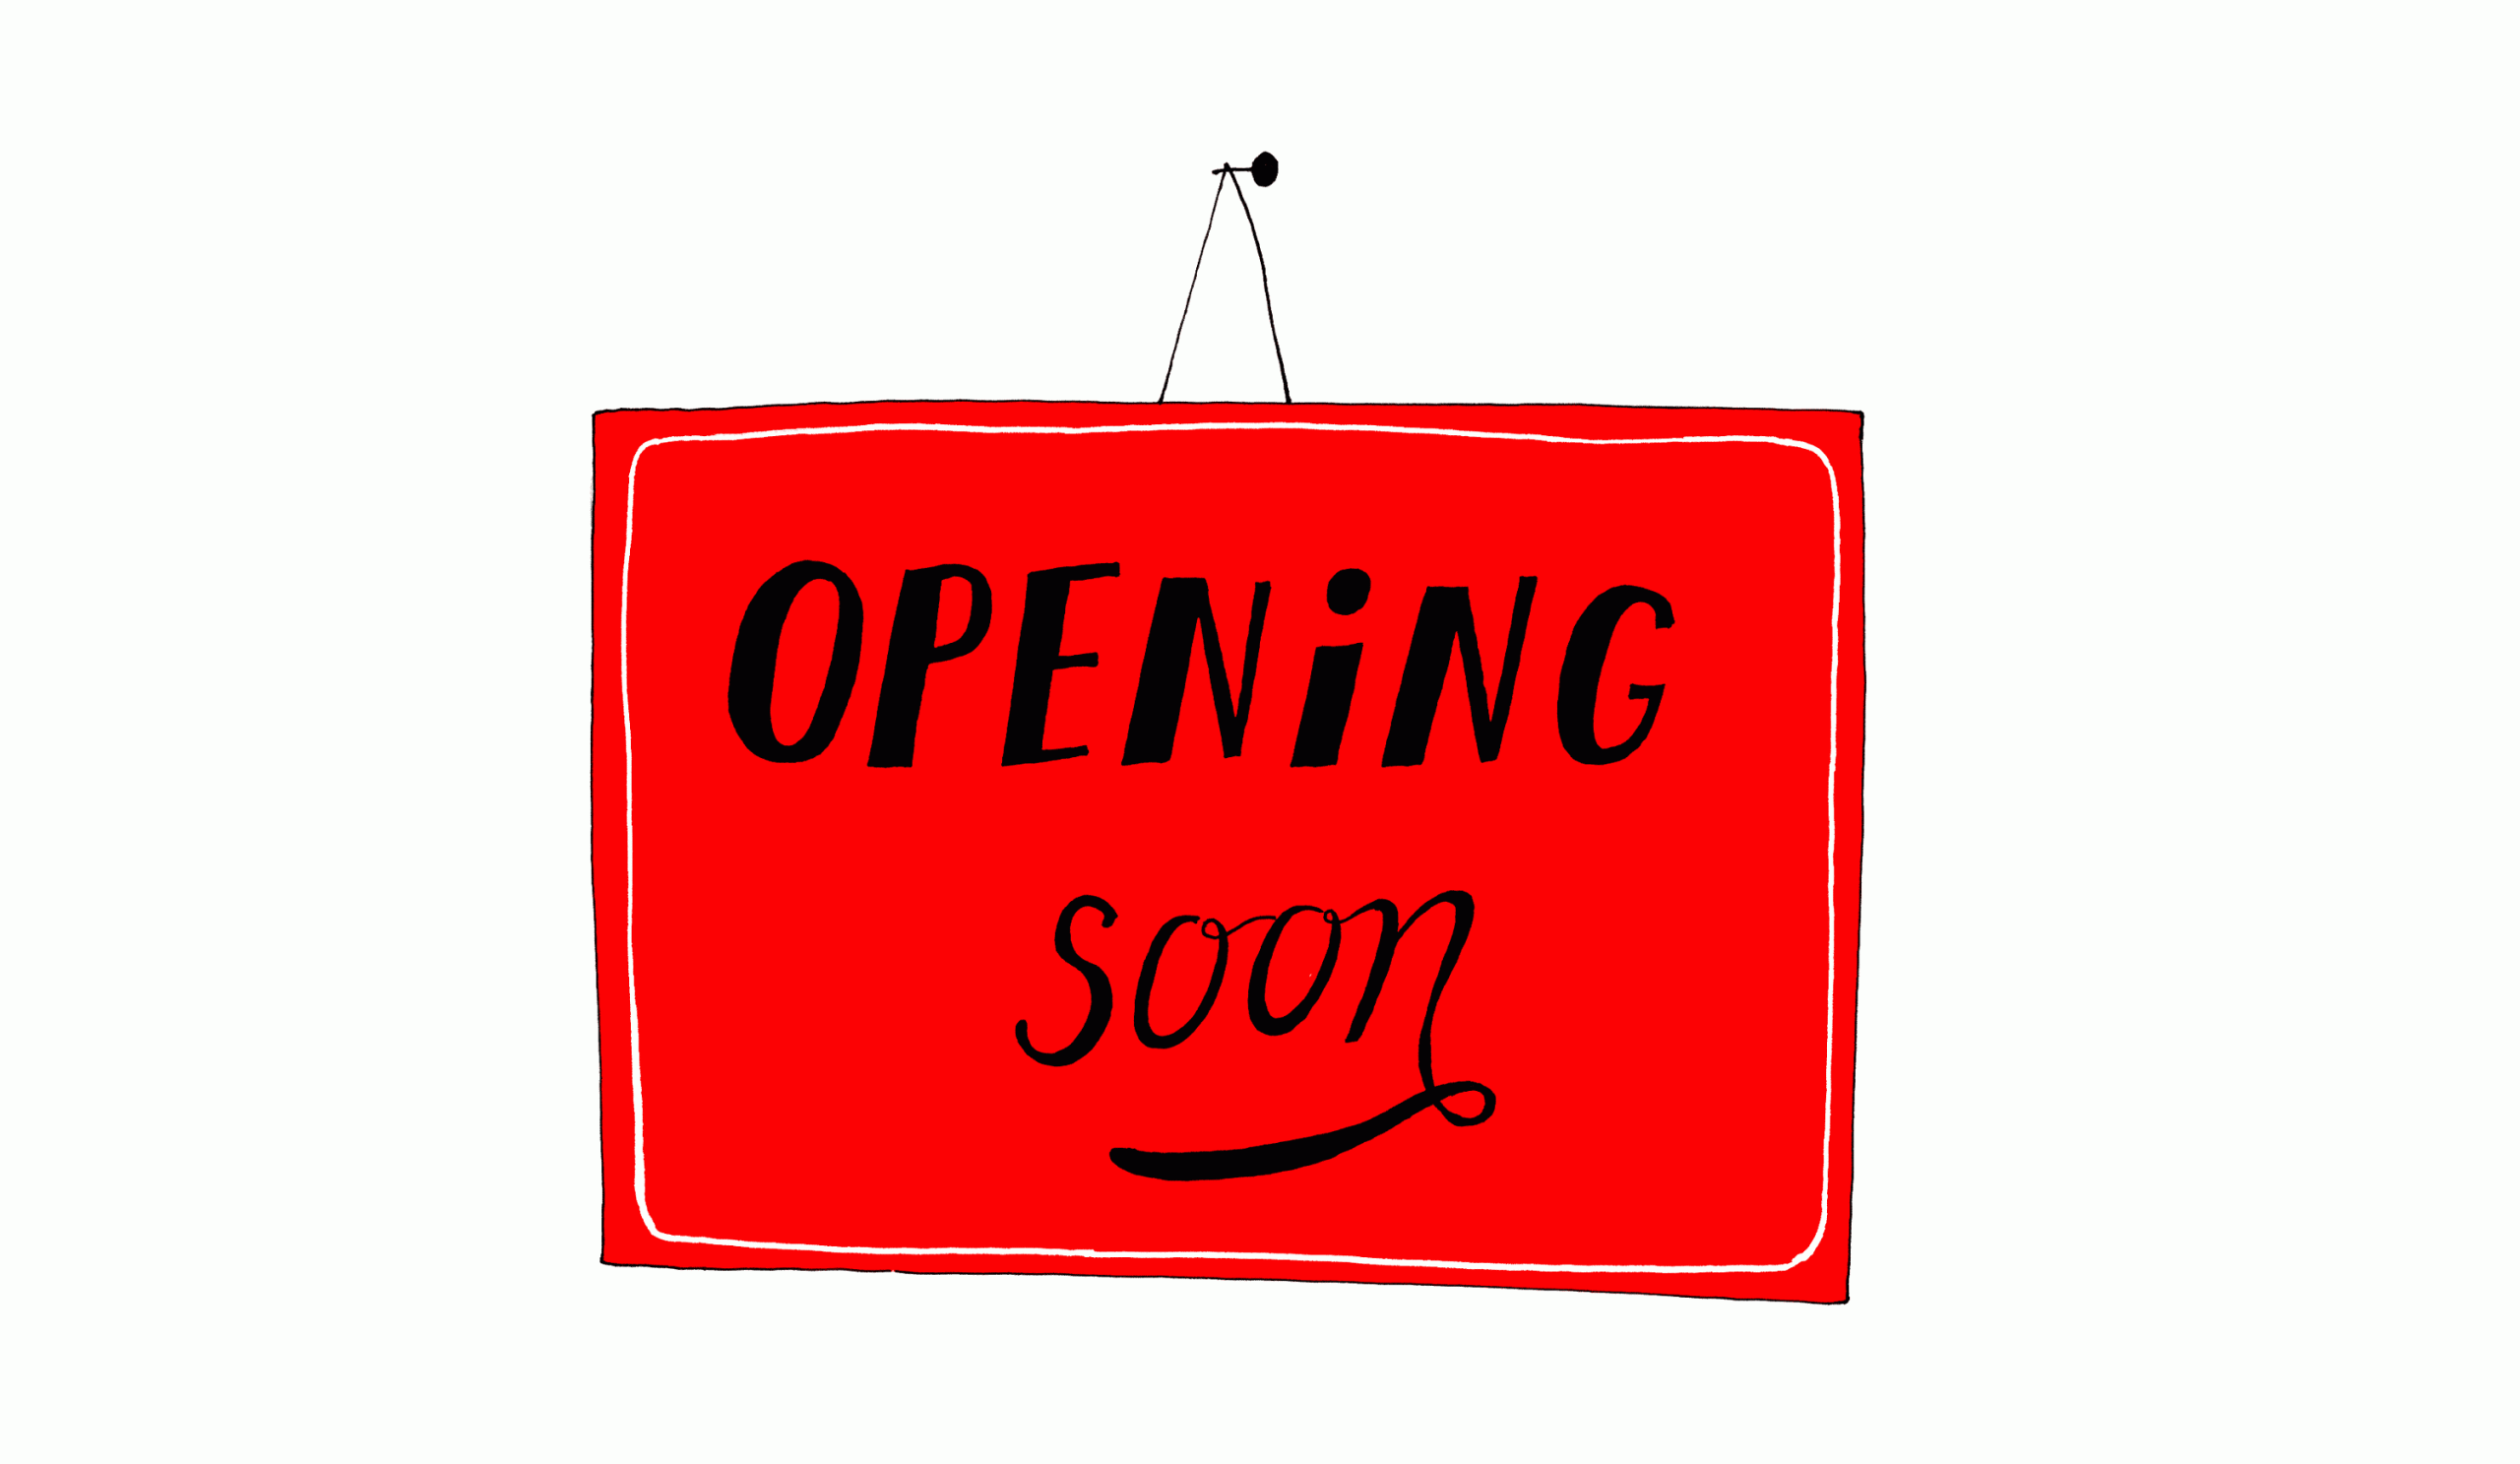 Openning soon sign for Cristina Guitian shop